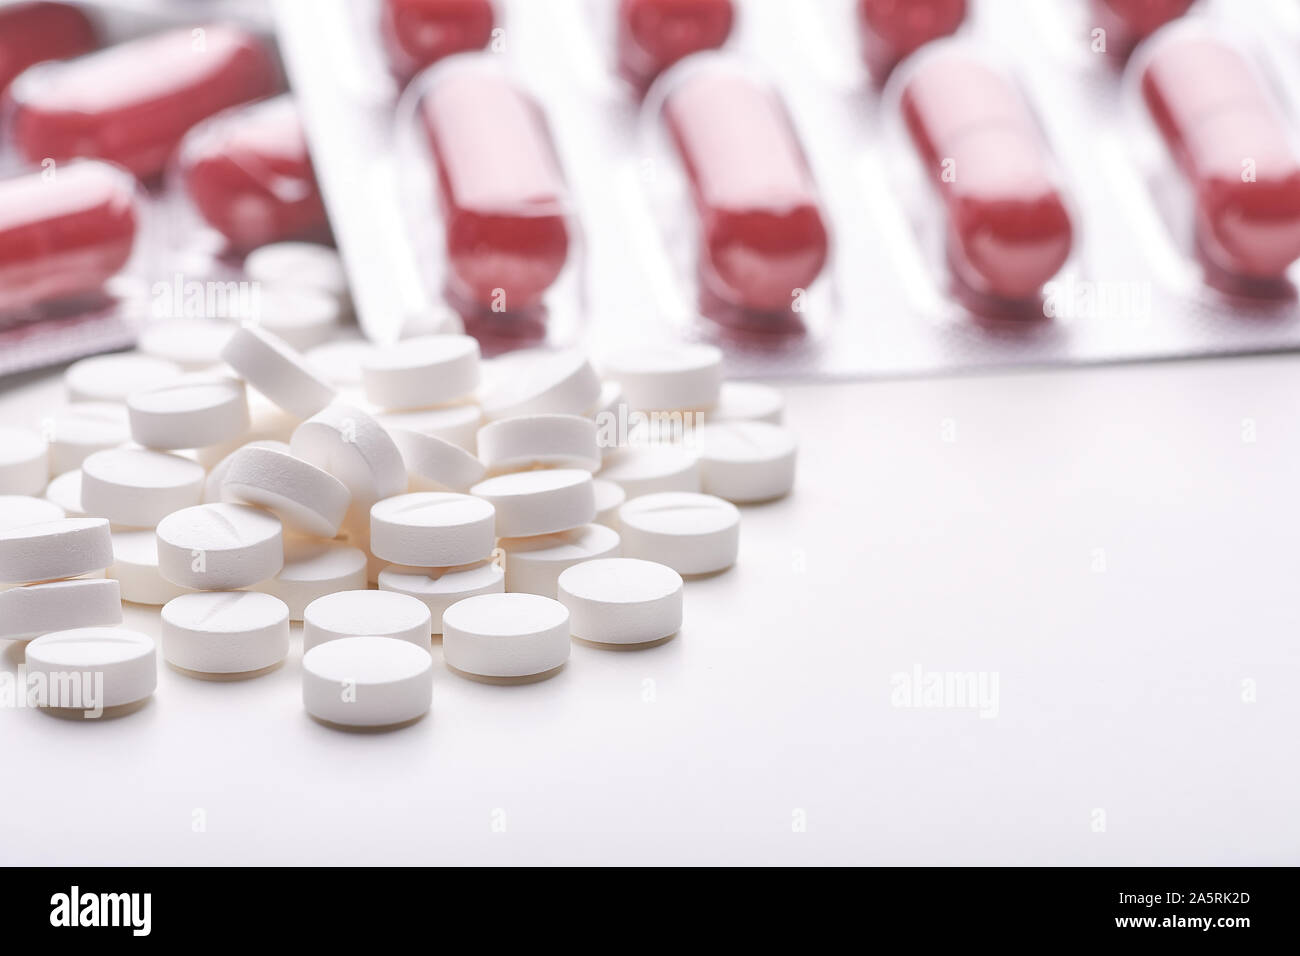 Still life with pile of round pills or tablets, antidepressants or painkillers with space for text. Red capsules in blister pack on white table top. Stock Photo